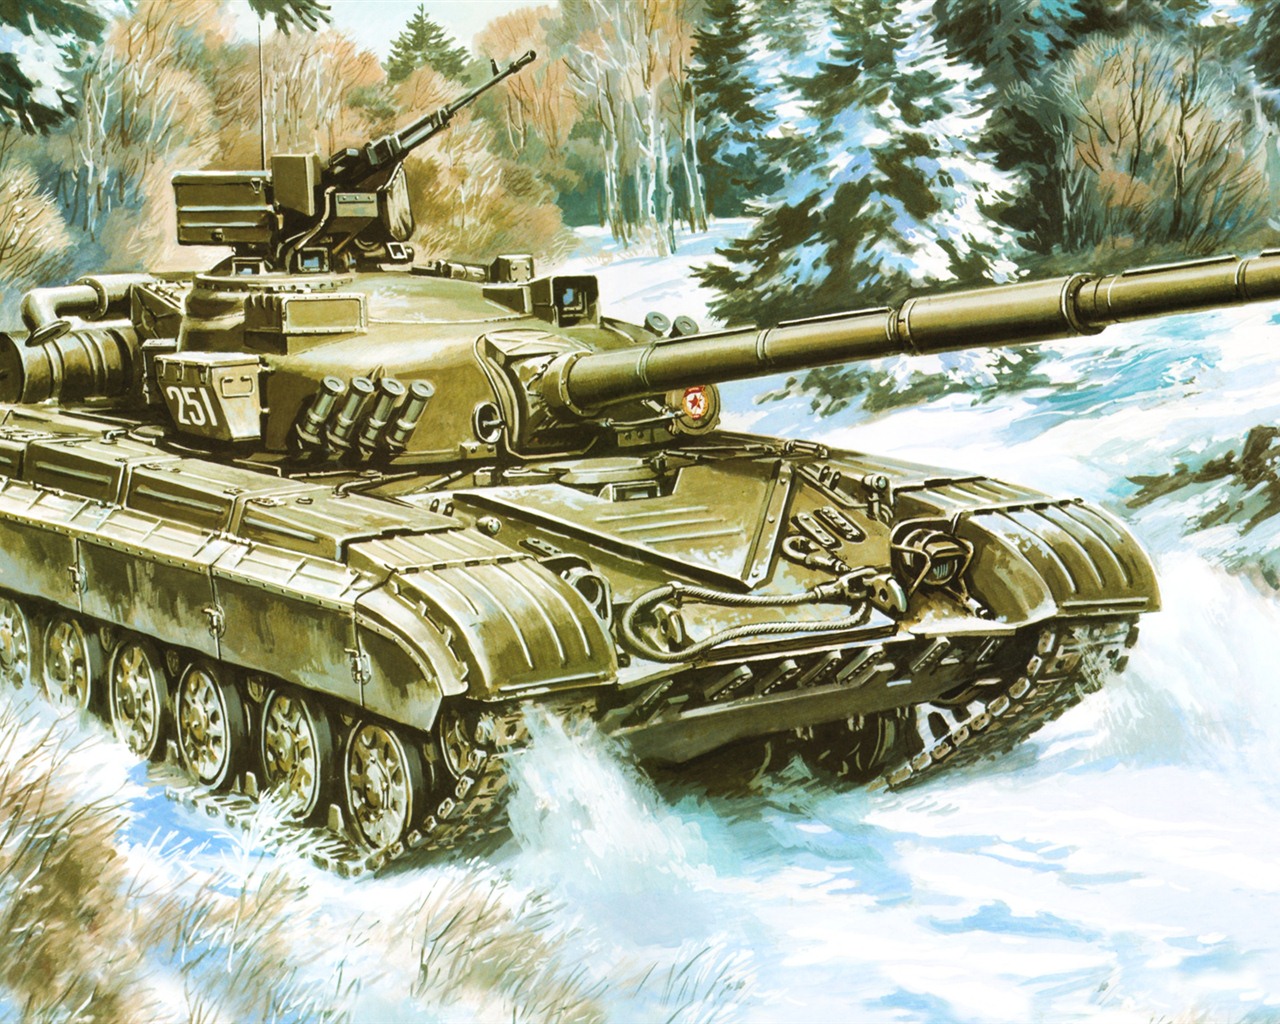 Military tanks, armored HD painting wallpapers #1 - 1280x1024